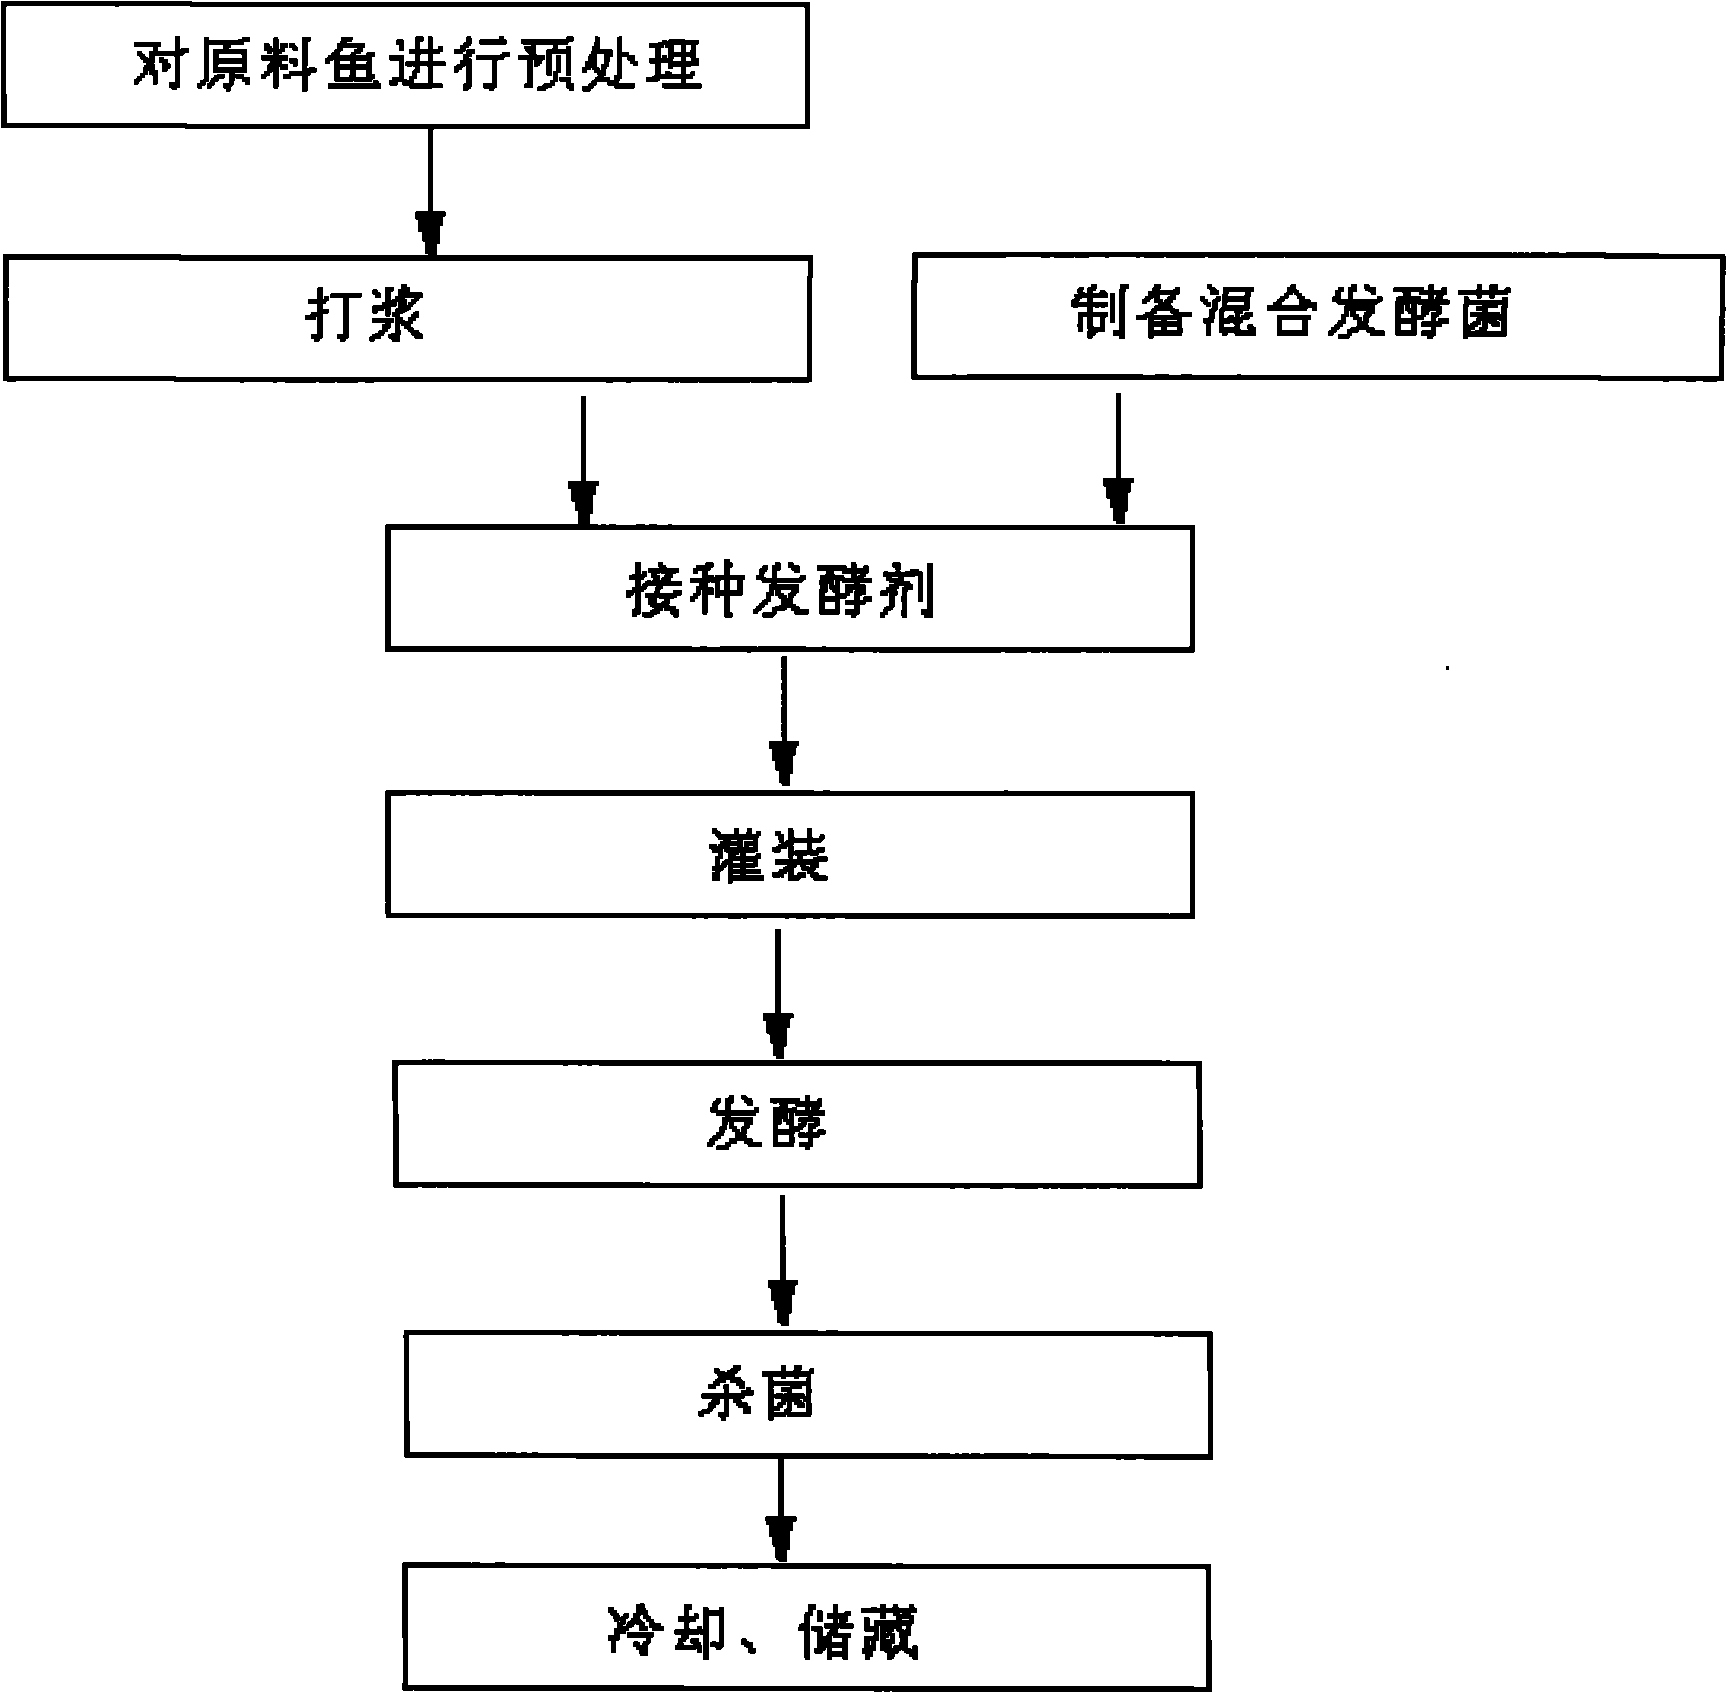 Method for preparing fish-and-rice mixed breaded fish sticks by using microorganism leavening agent